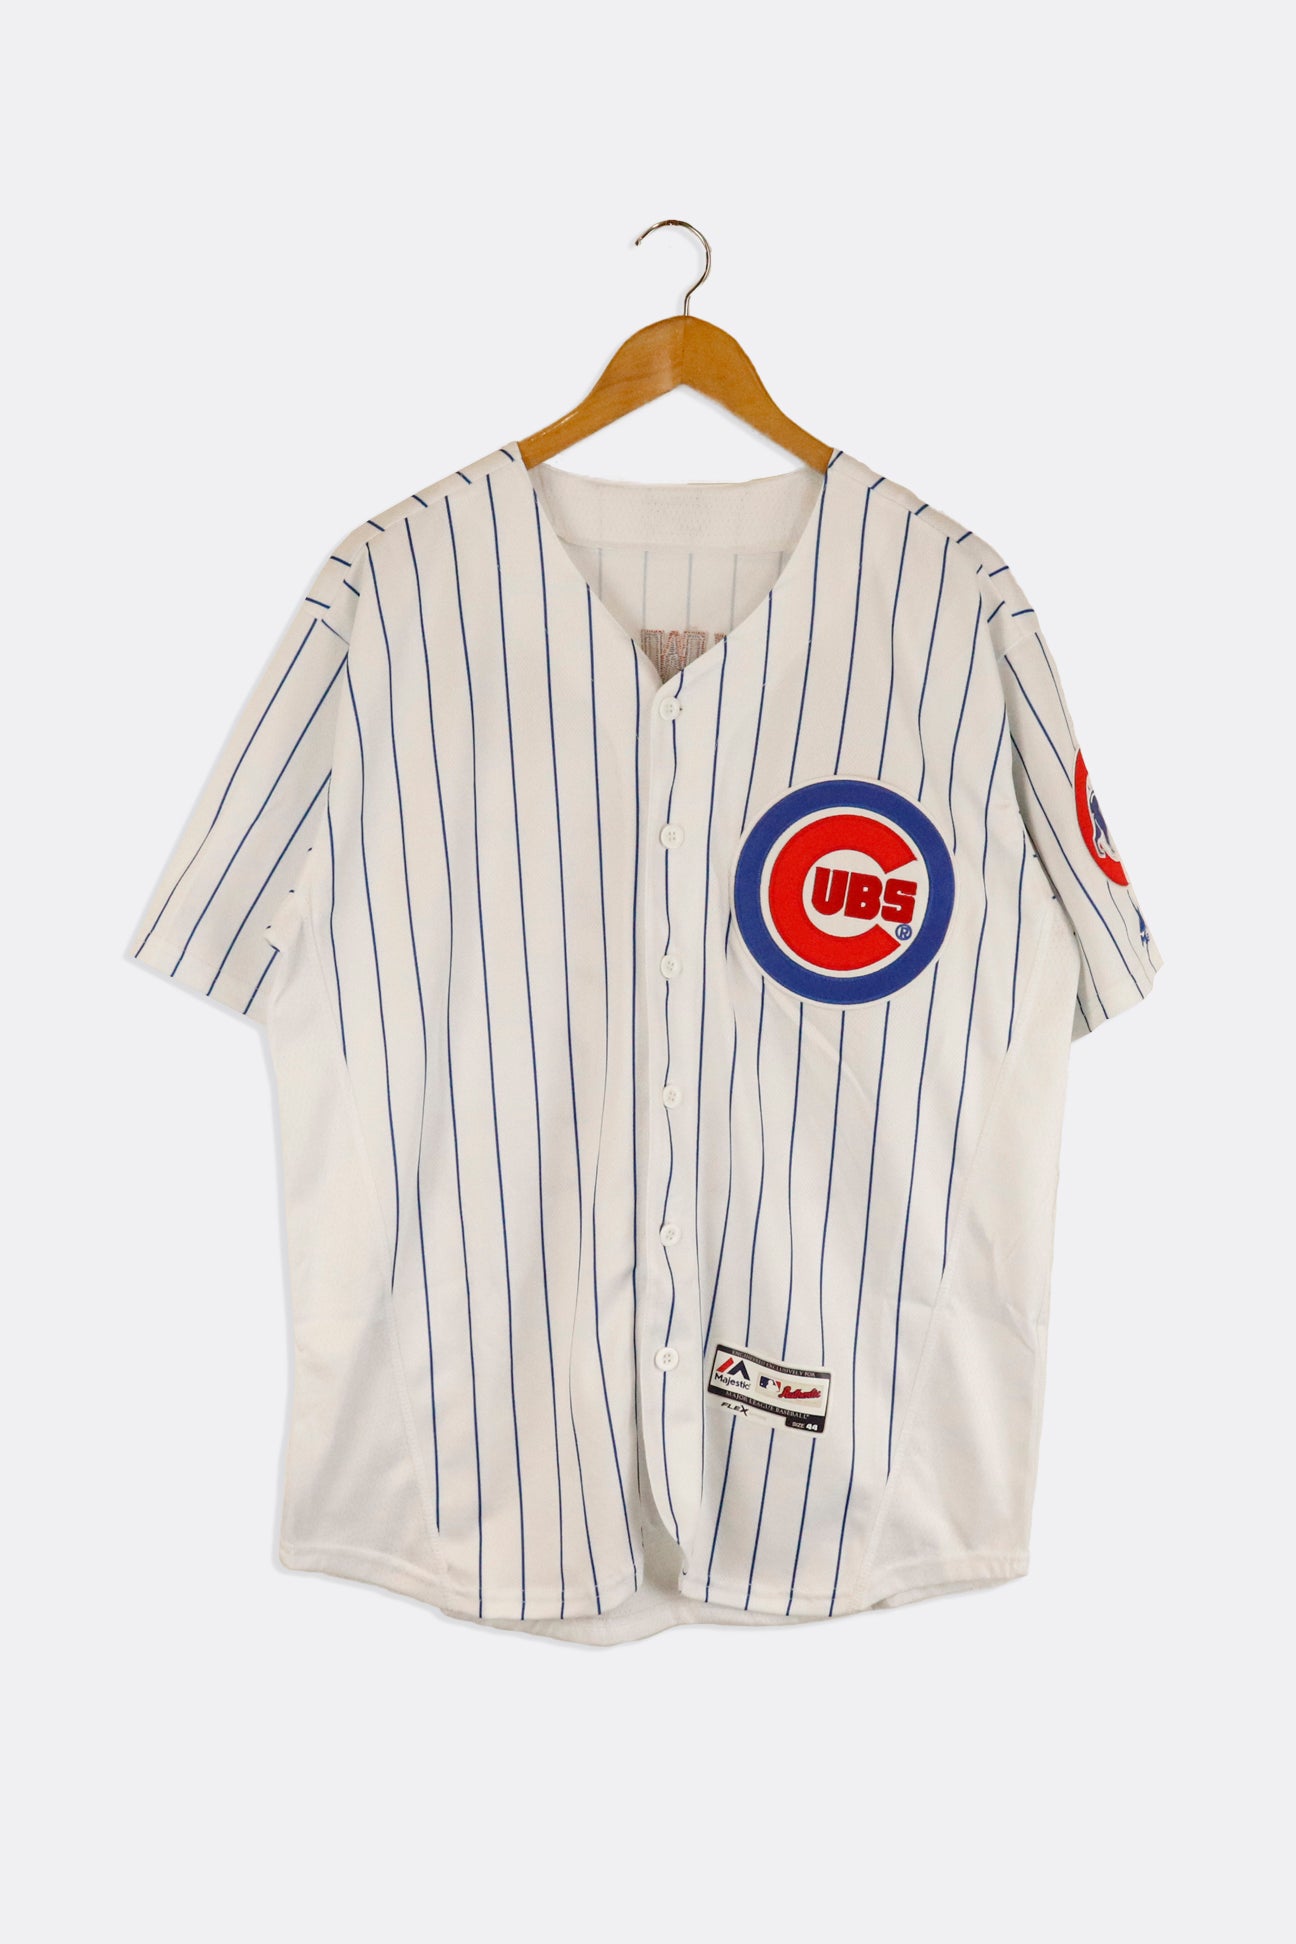 Majestic Vintage Chicago Cubs jersey size XL Stitched